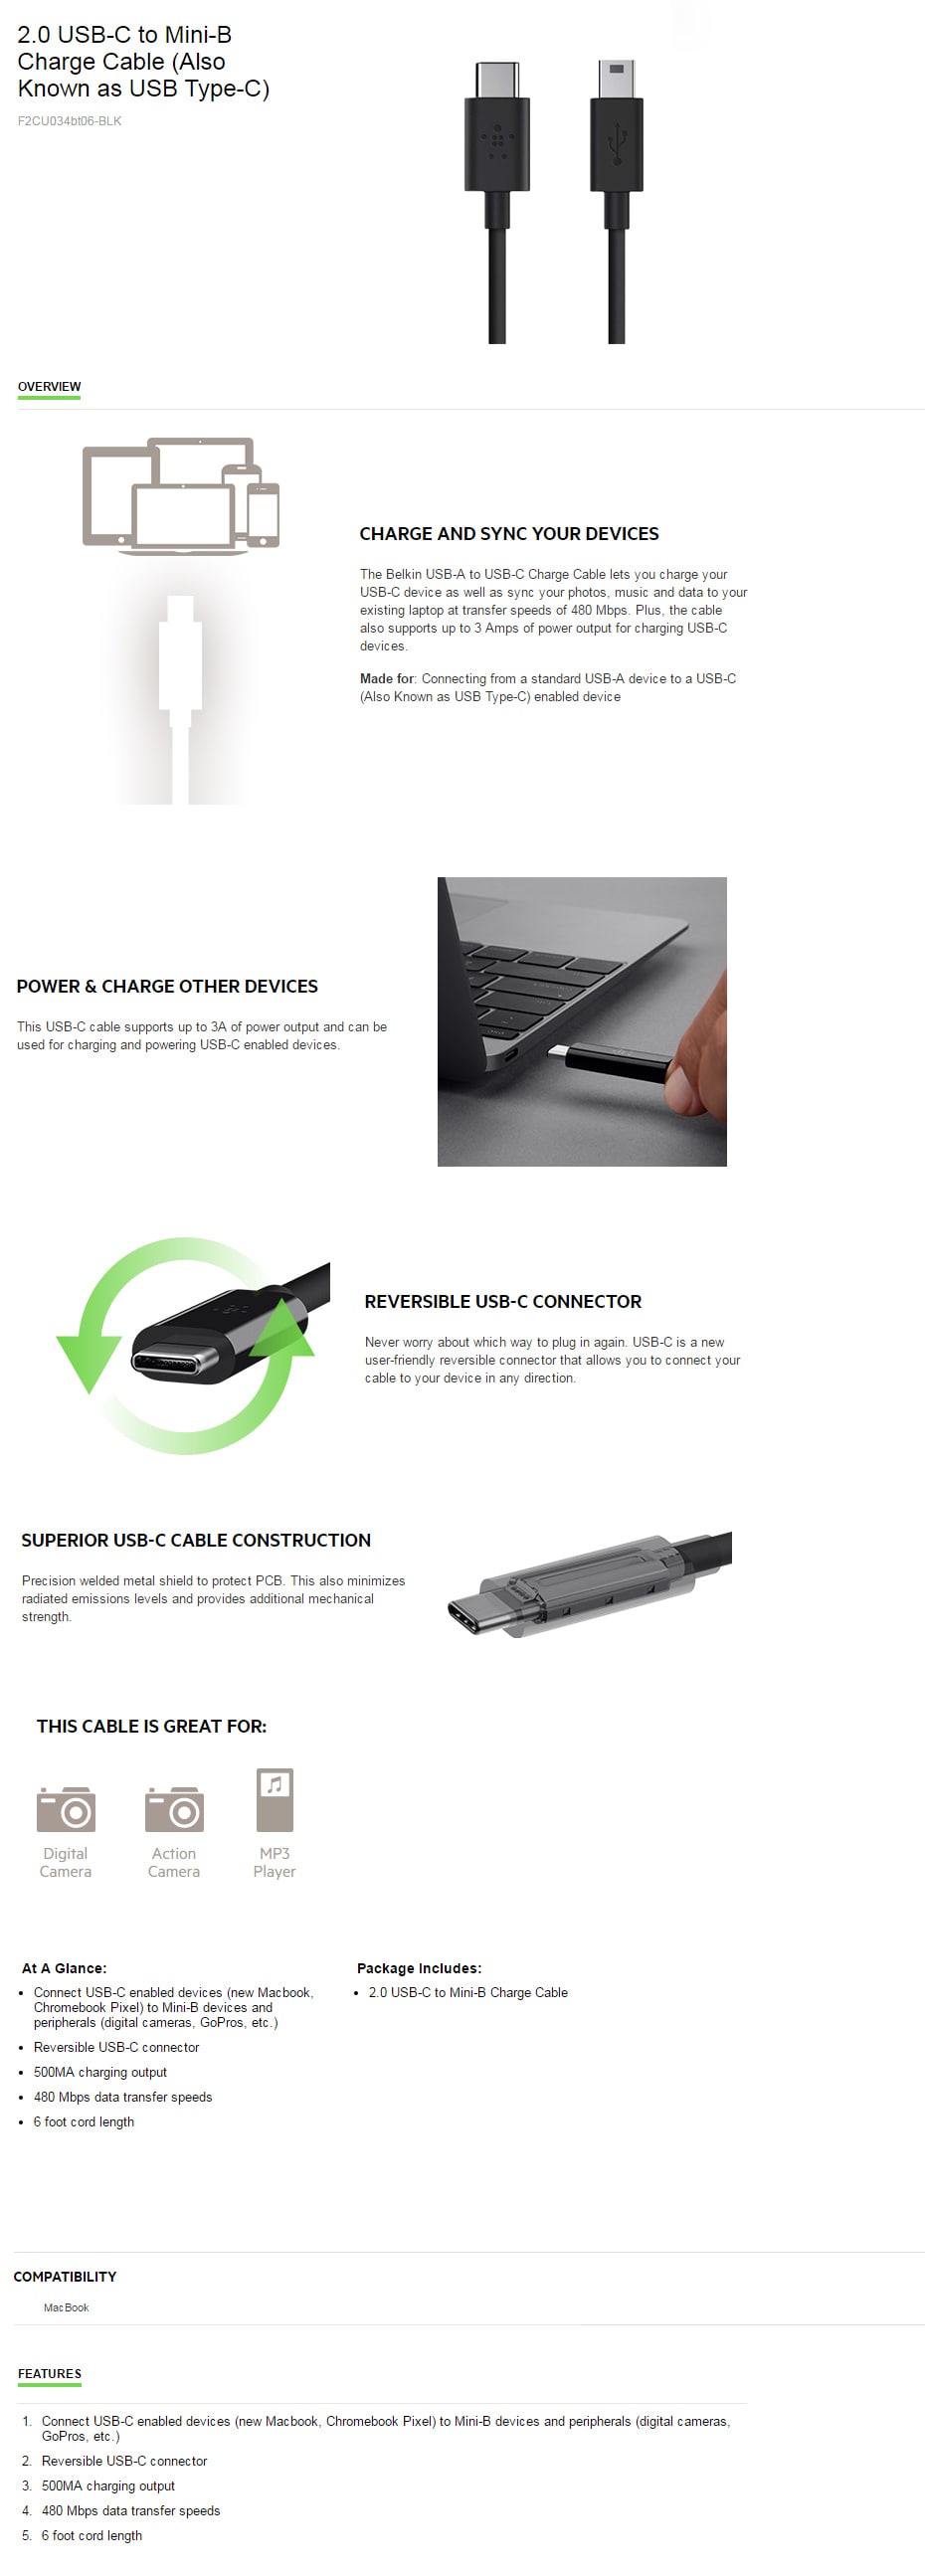 Belkin  Charge Cable features